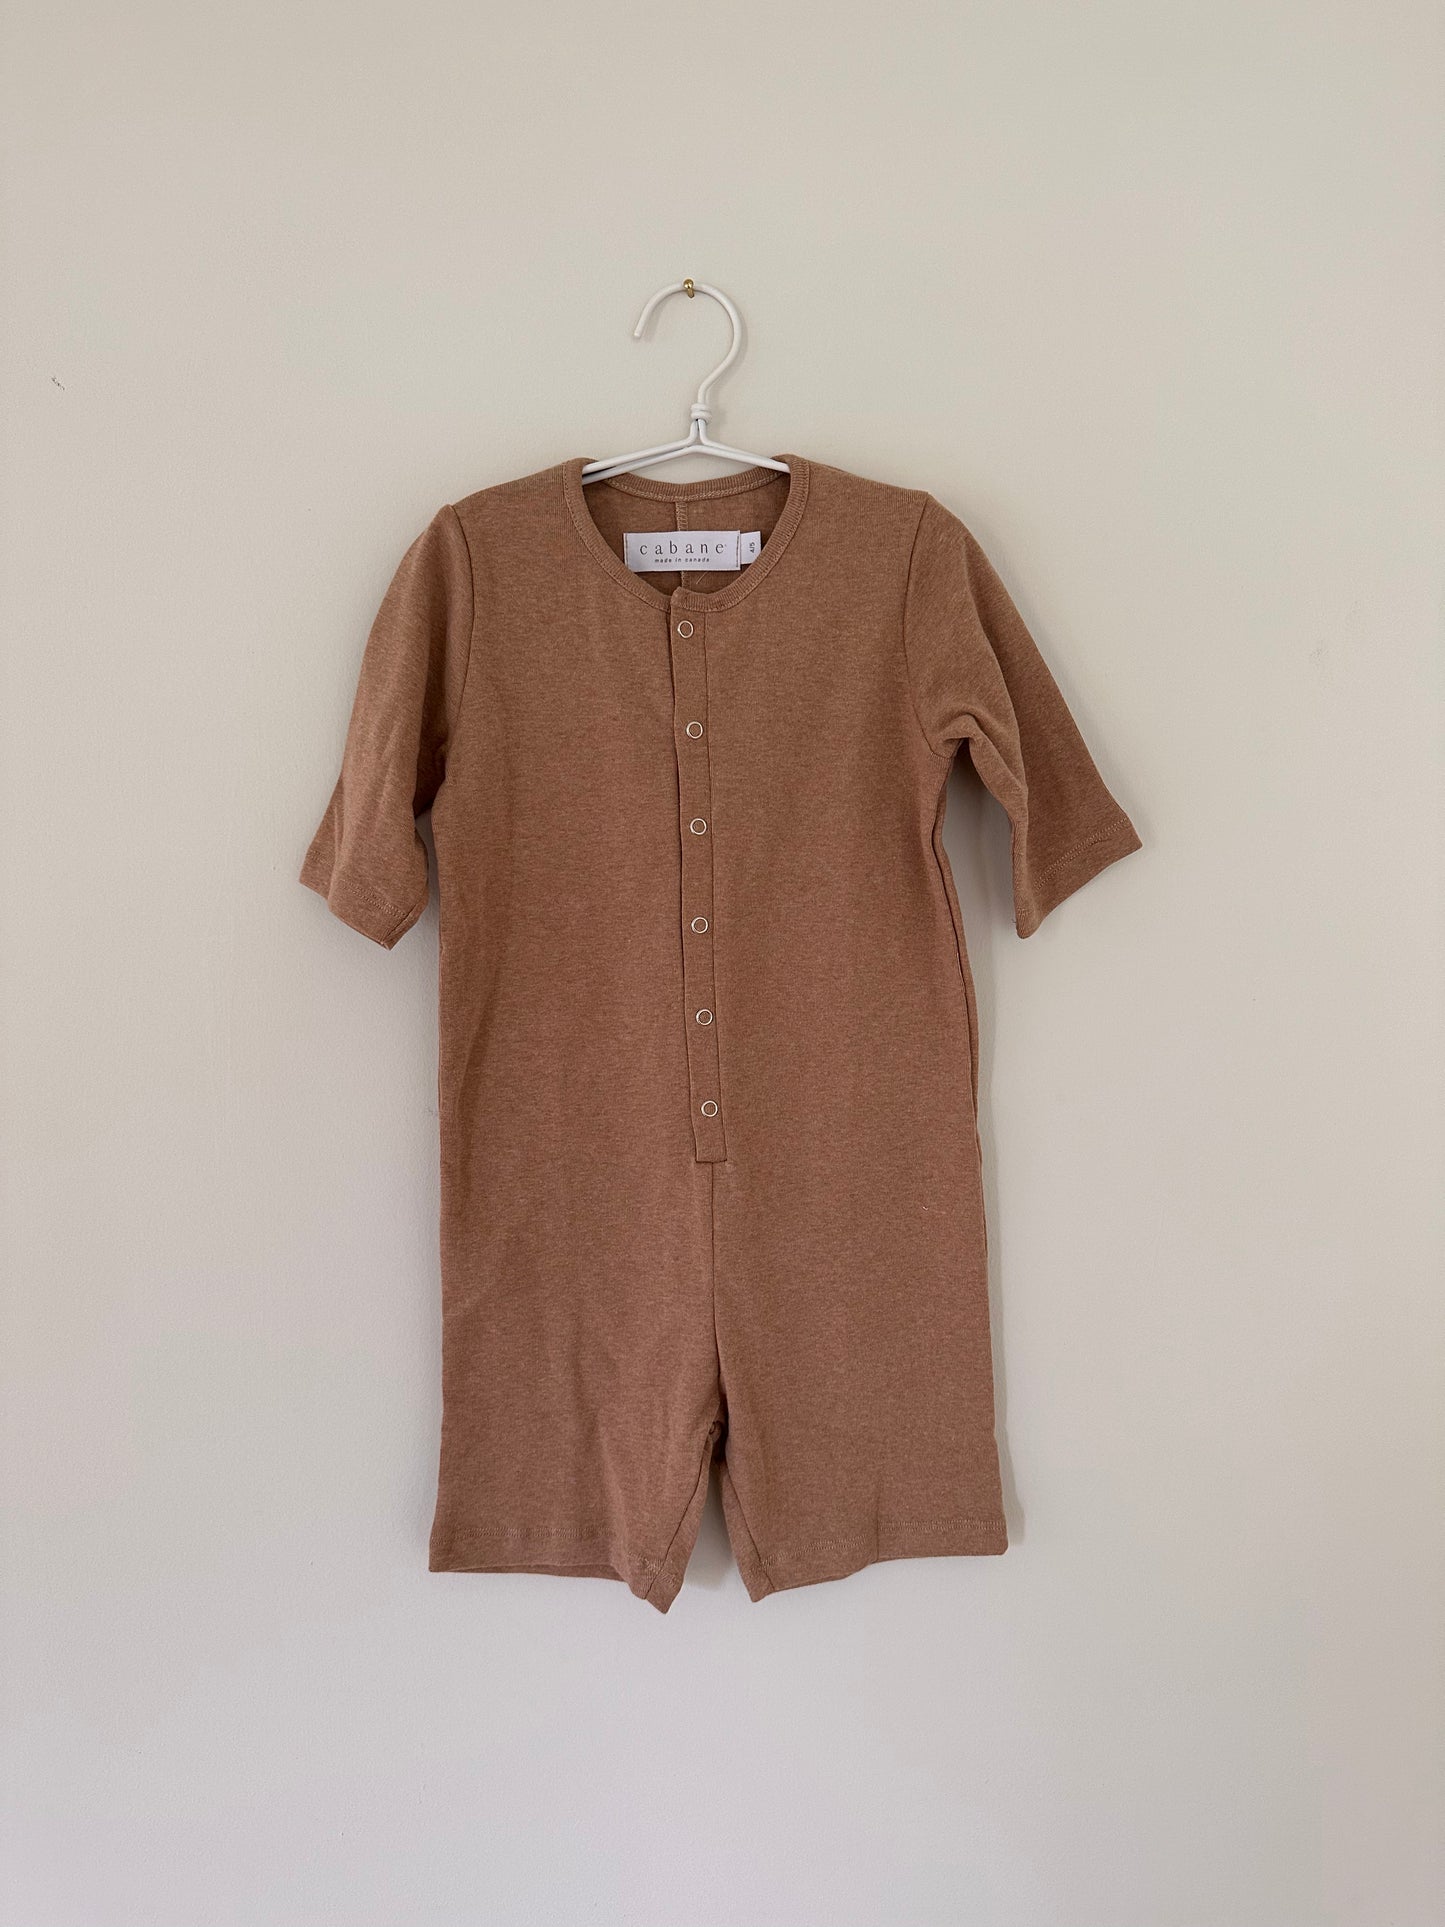 sample HIGH-NOON SUNSUIT 4/5 years